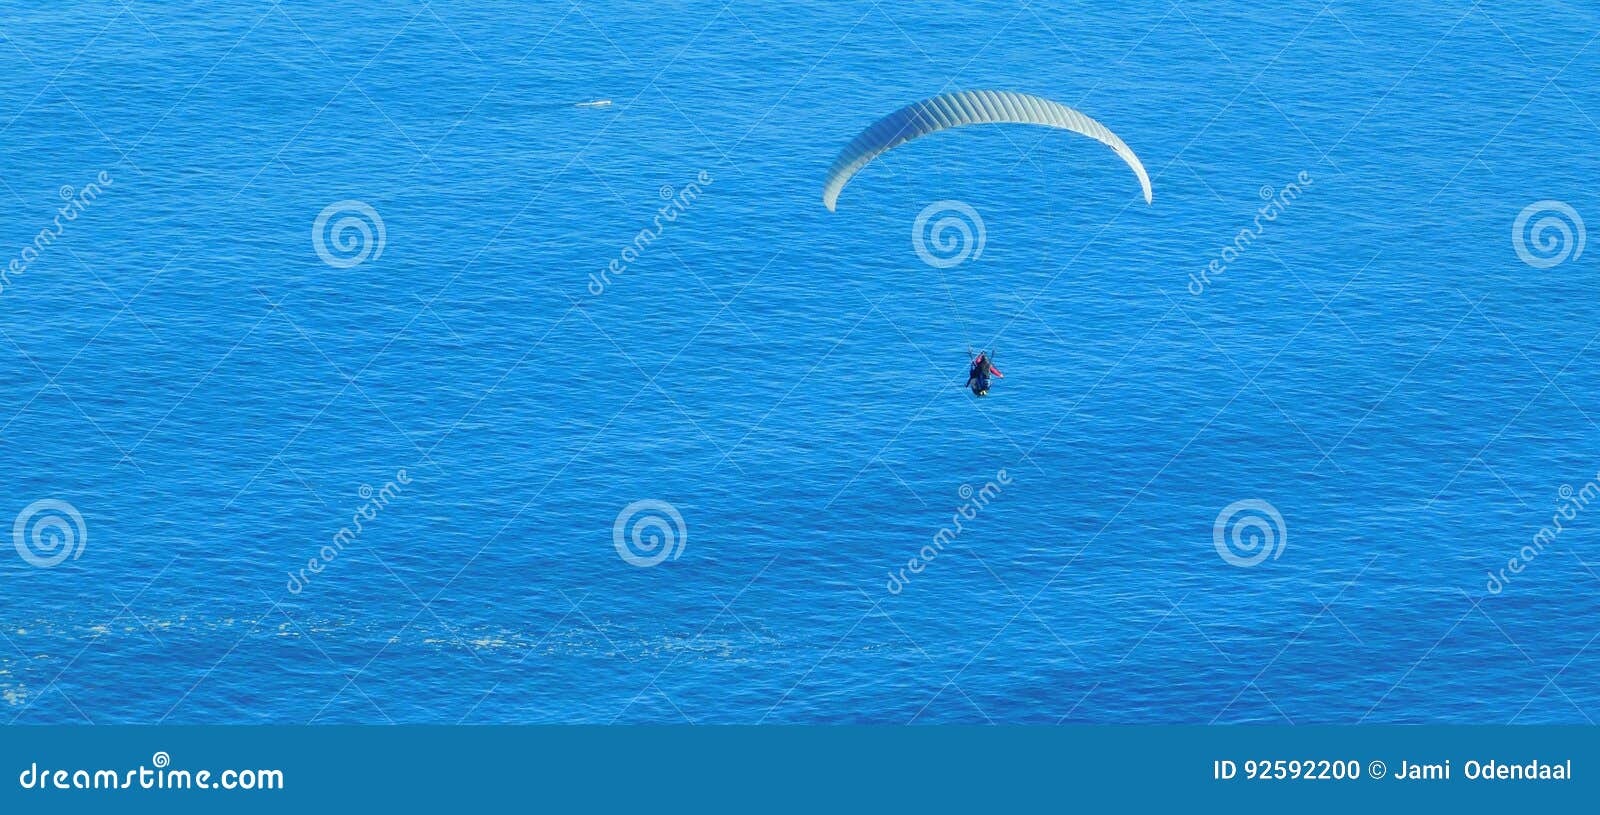 paragliding from signal hill, cape town